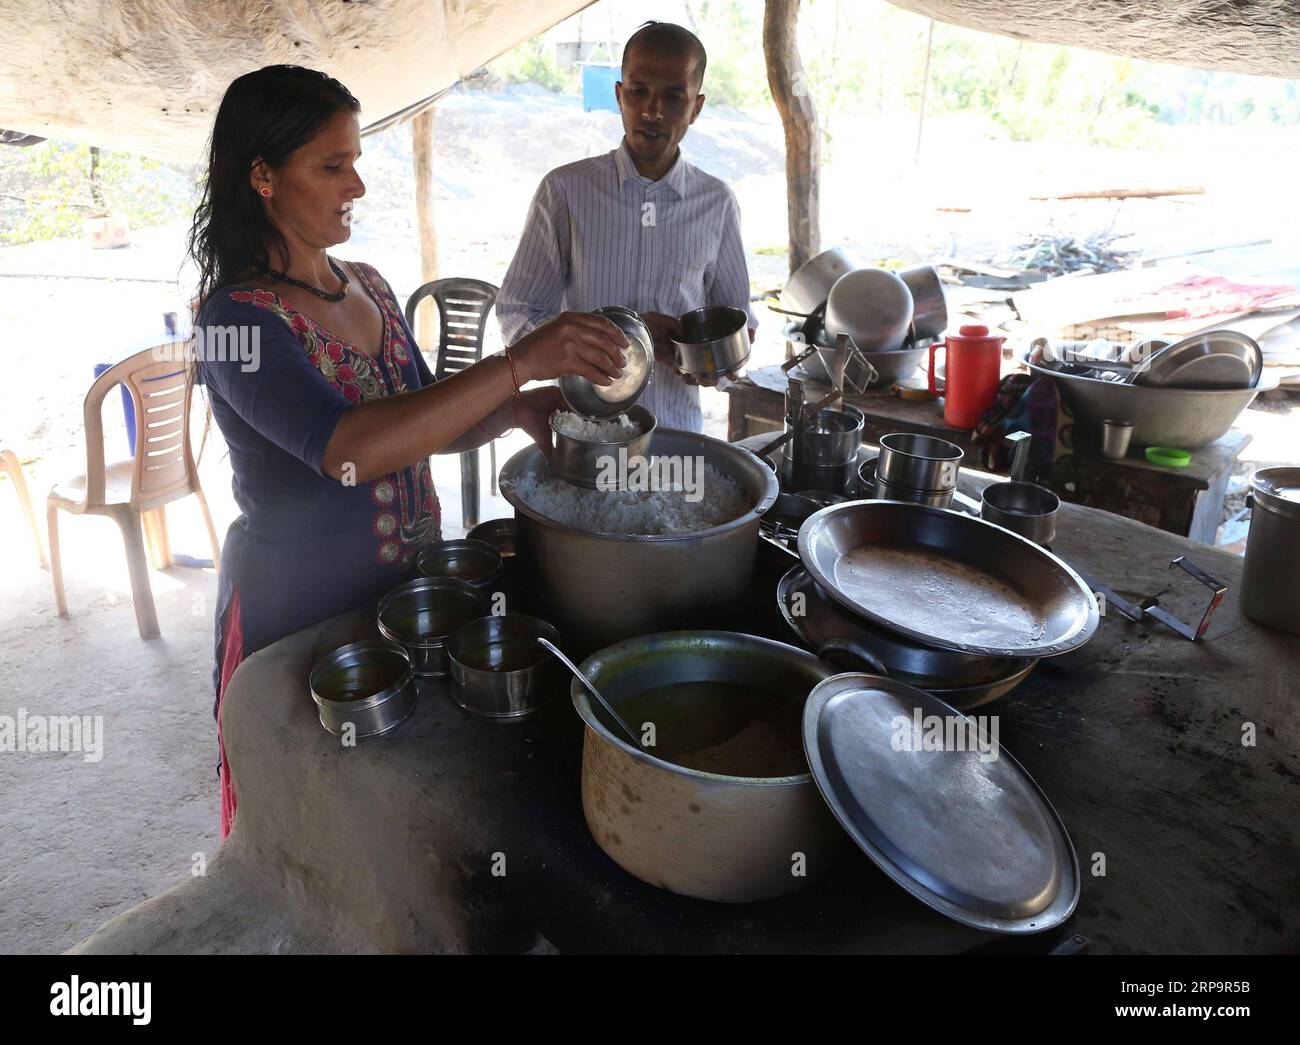 (190415) -- SURKHET, April 15, 2019 -- Laxmi Jaisi and her husband Lila Ram Acharya prepare food for workers at their hotel near the construction site of the tunnel for the Bheri Babai Diversion Multipurpose Project in Surkhet, west Nepal, March 26, 2019. Forty-six-year-old Lila Ram Acharya began to work in the Bheri Babai Diversion Multipurpose Project two years ago and his wife ran a hotel to serve meal to the project workers. The couple are well settled and economically benefited due to the China-constructed project. TO GO WITH Feature: Chinese irrigation project helps agriculture, offers e Stock Photo